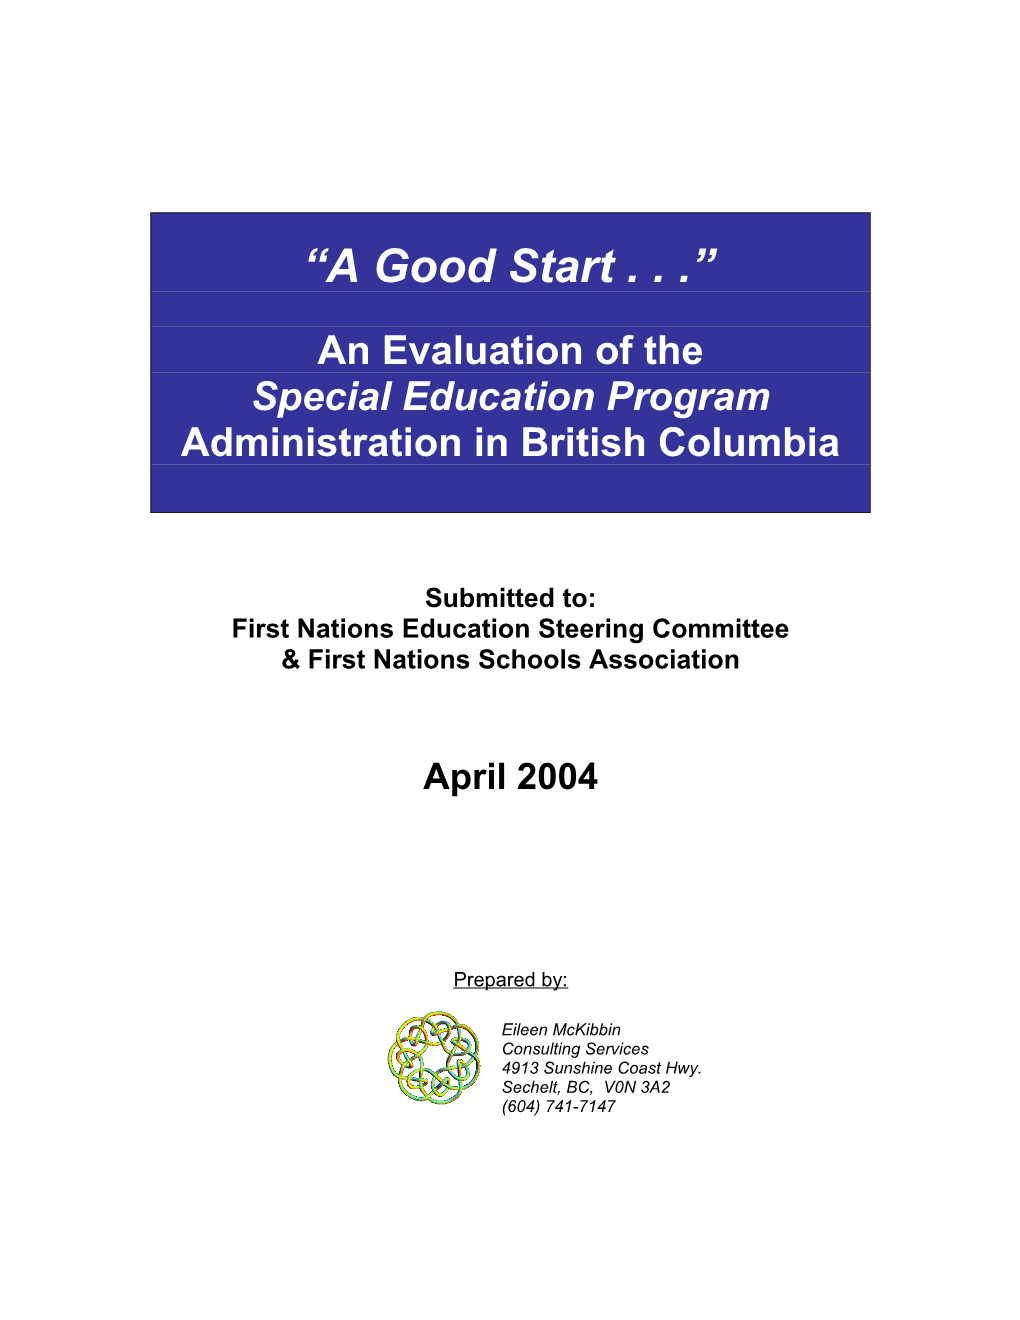 Special Education Program Administration in British Columbia